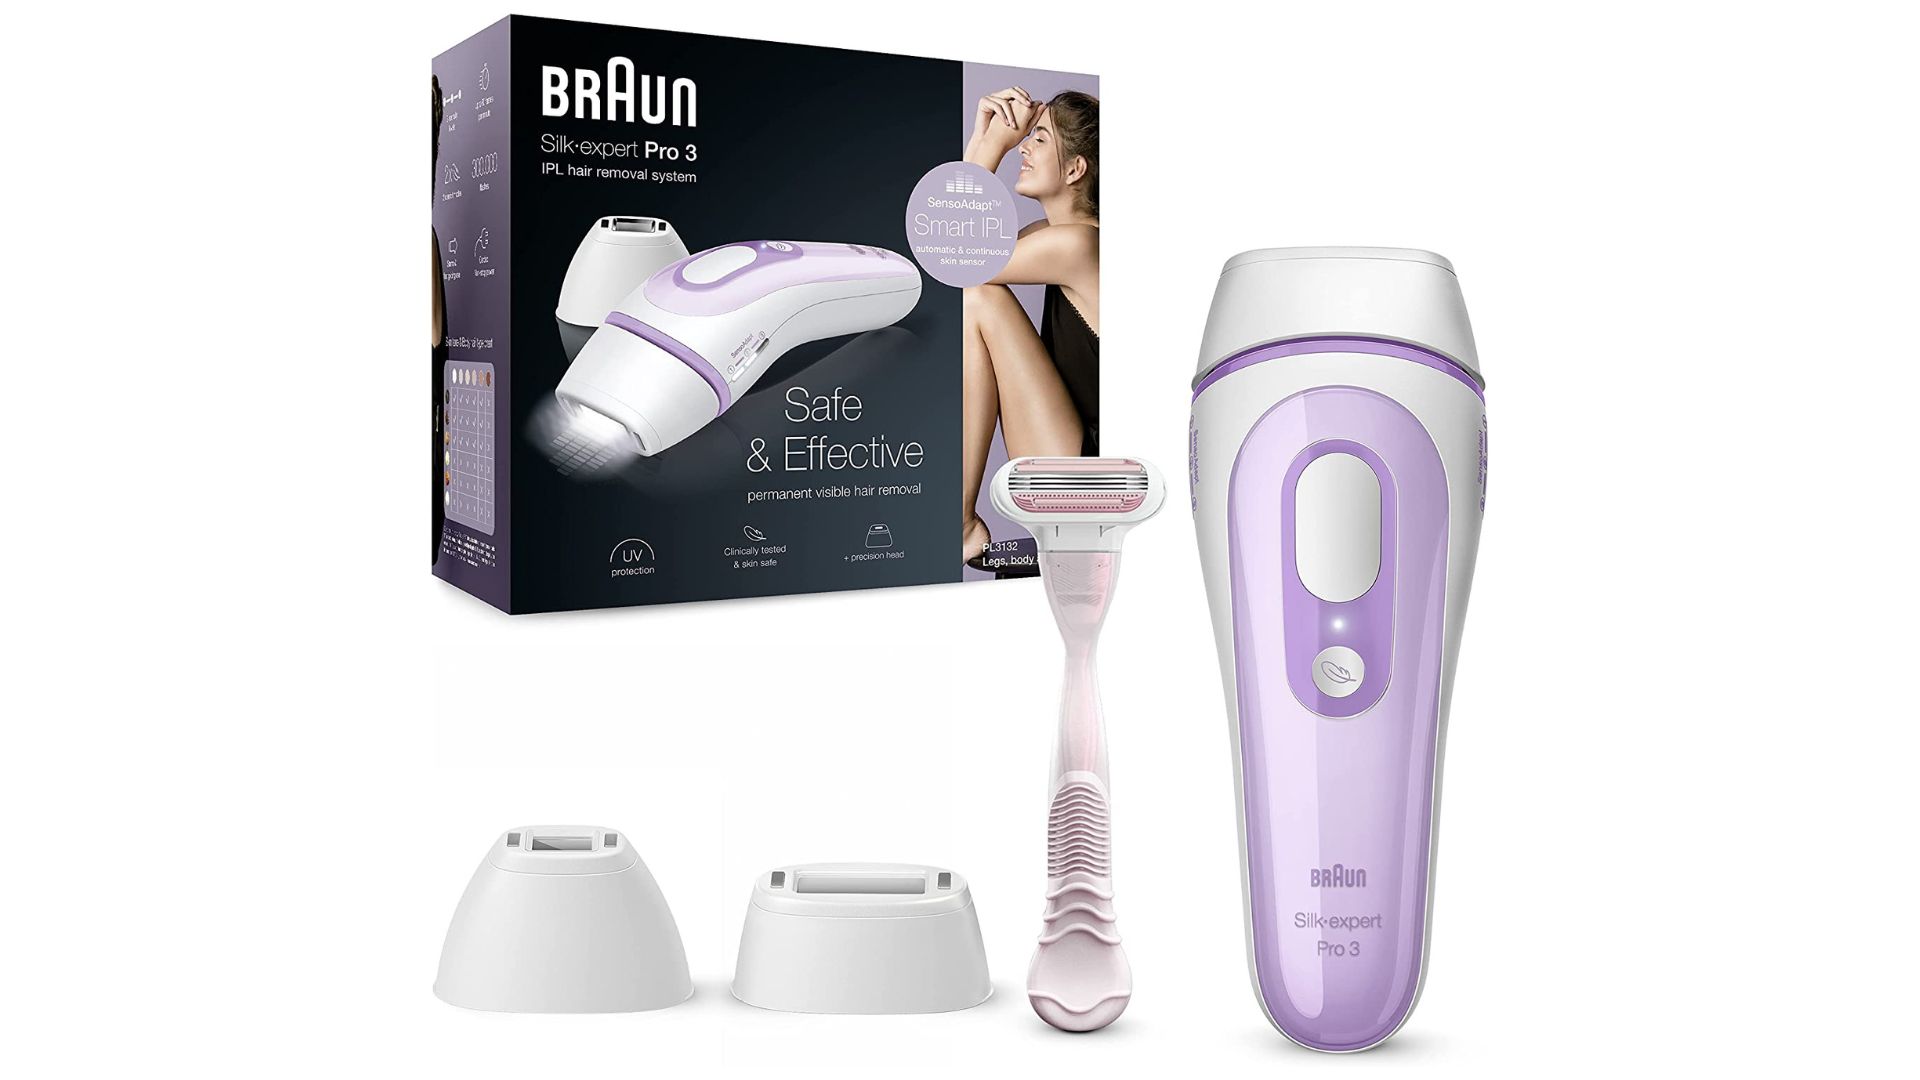 Laser hair removal at home: Braun Silk Expert Pro 3